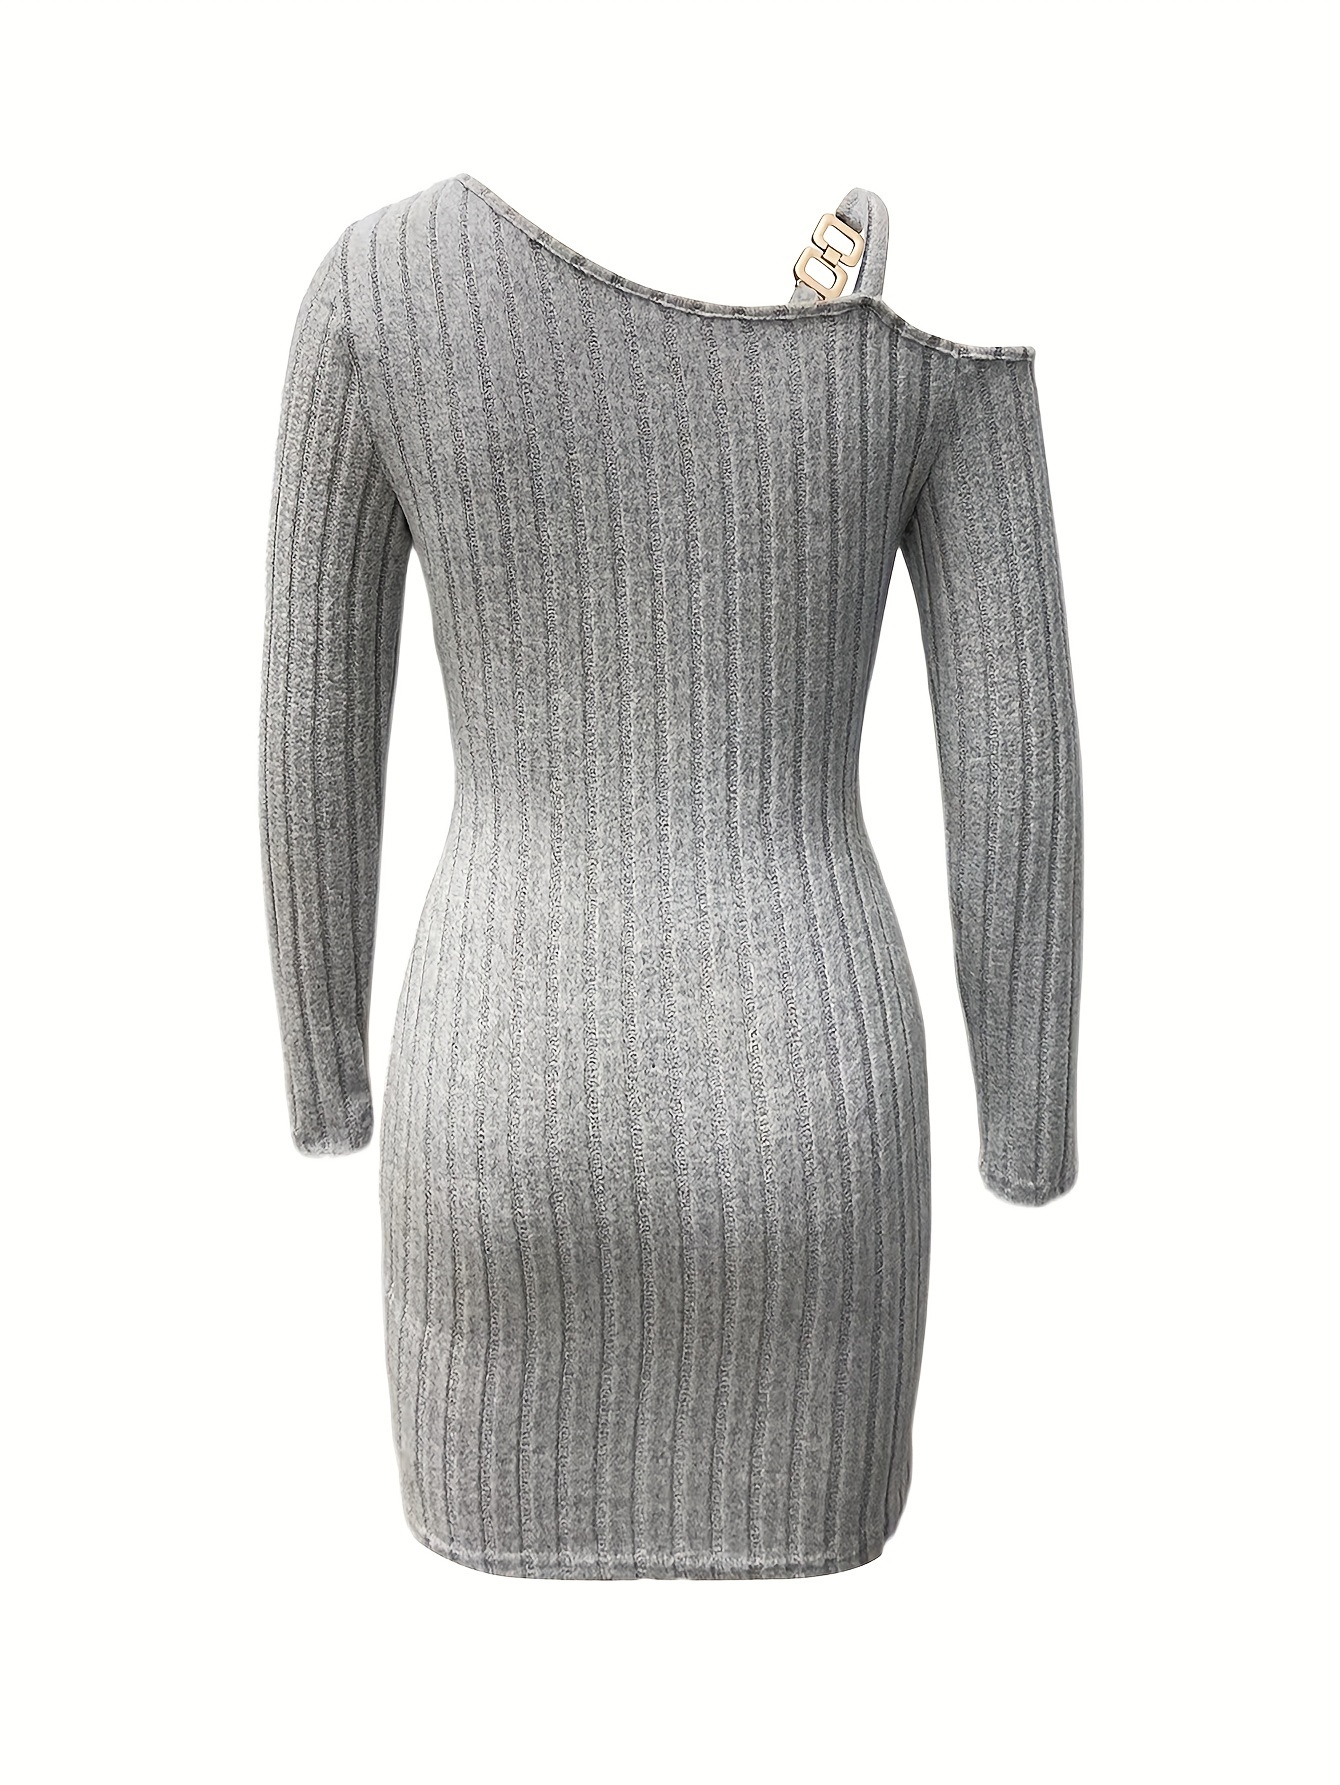 ribbed slanted shoulder dress party wear solid long sleeve mini dress womens clothing details 2